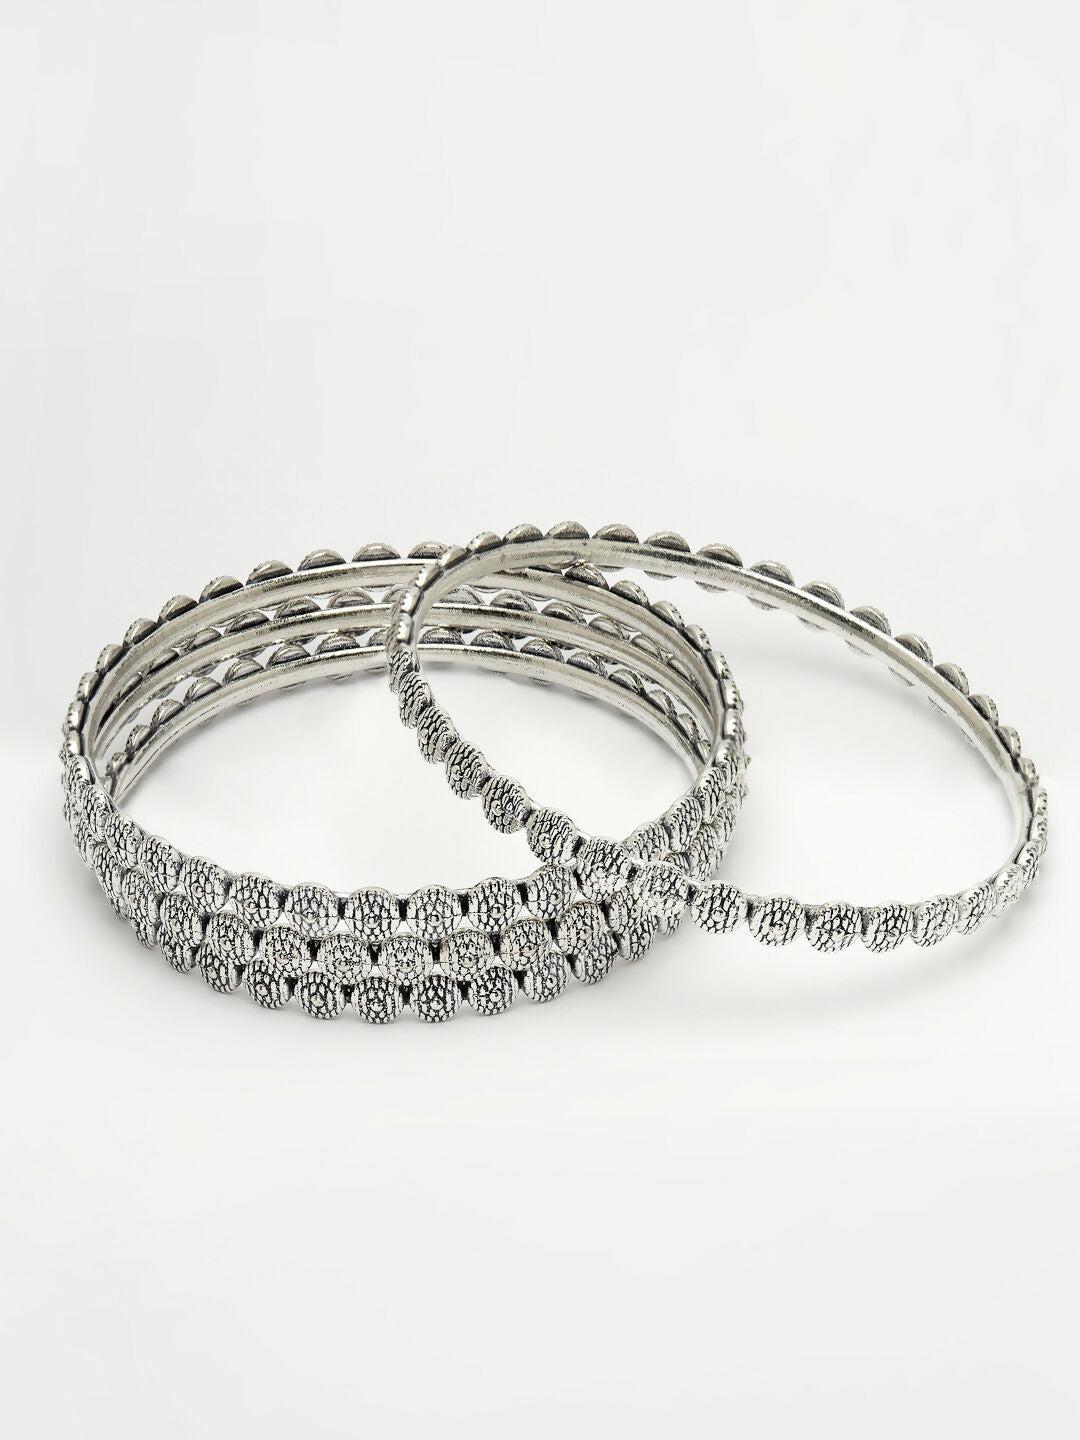 NVR Women's Set of 4 Silver-Toned German Silver Oxidised Bangles - Distacart